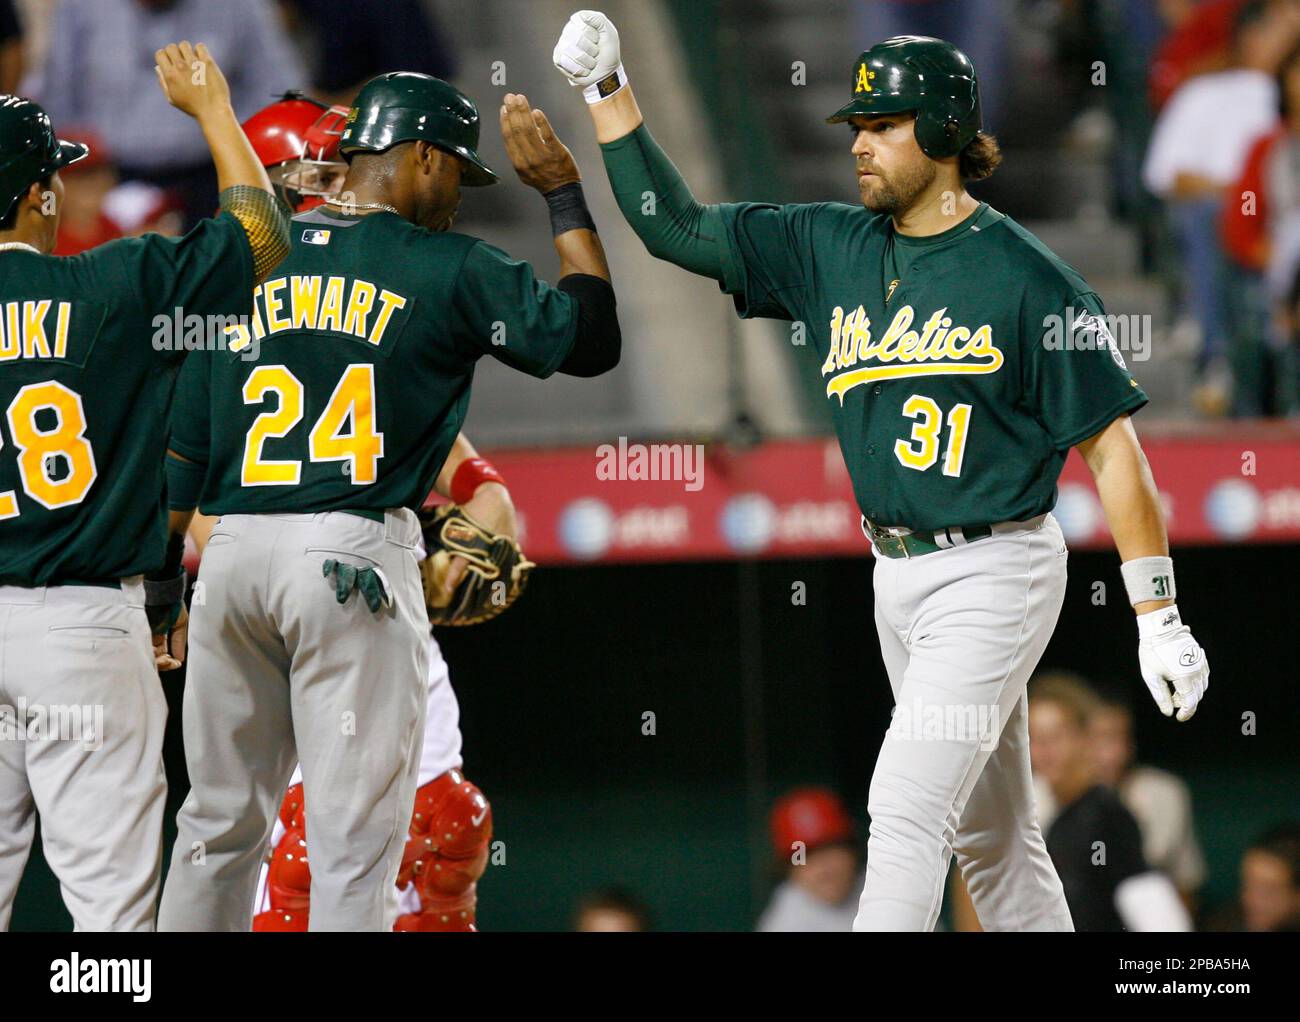 After hitting a three-run homer, Oakland Athletics designated hitter Mike Piazza, right, celebrates with teammates he drove in, Kurt Suzuki, left, and Shannon Stewart, in the fourth inning of a baseball game